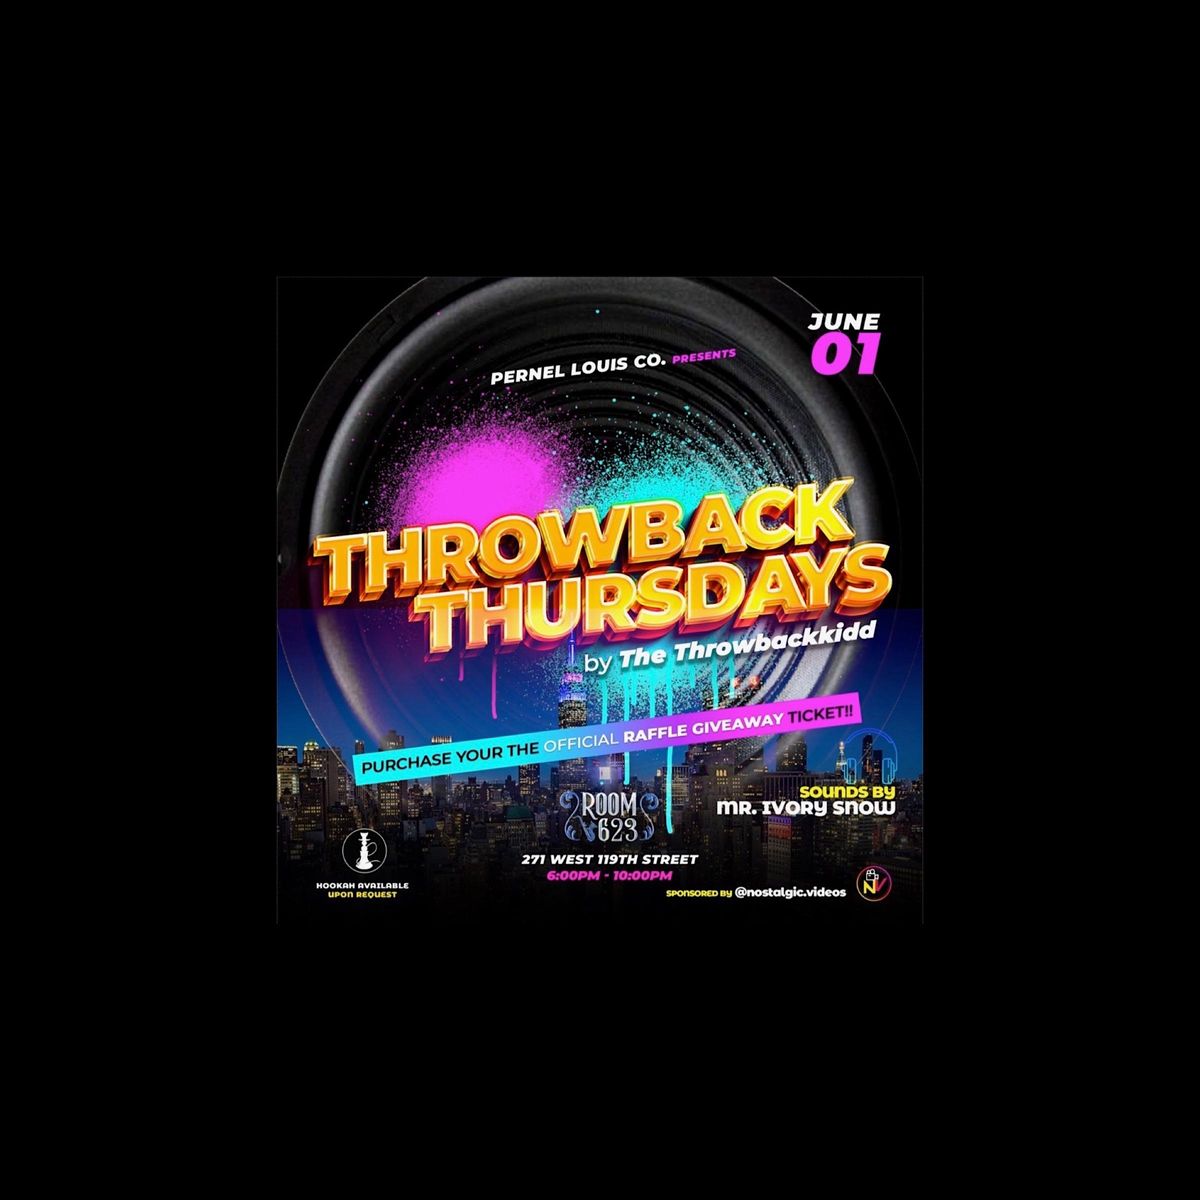 Pernel Louis Co. Presents: Throwback Thursdays @ Room 623!